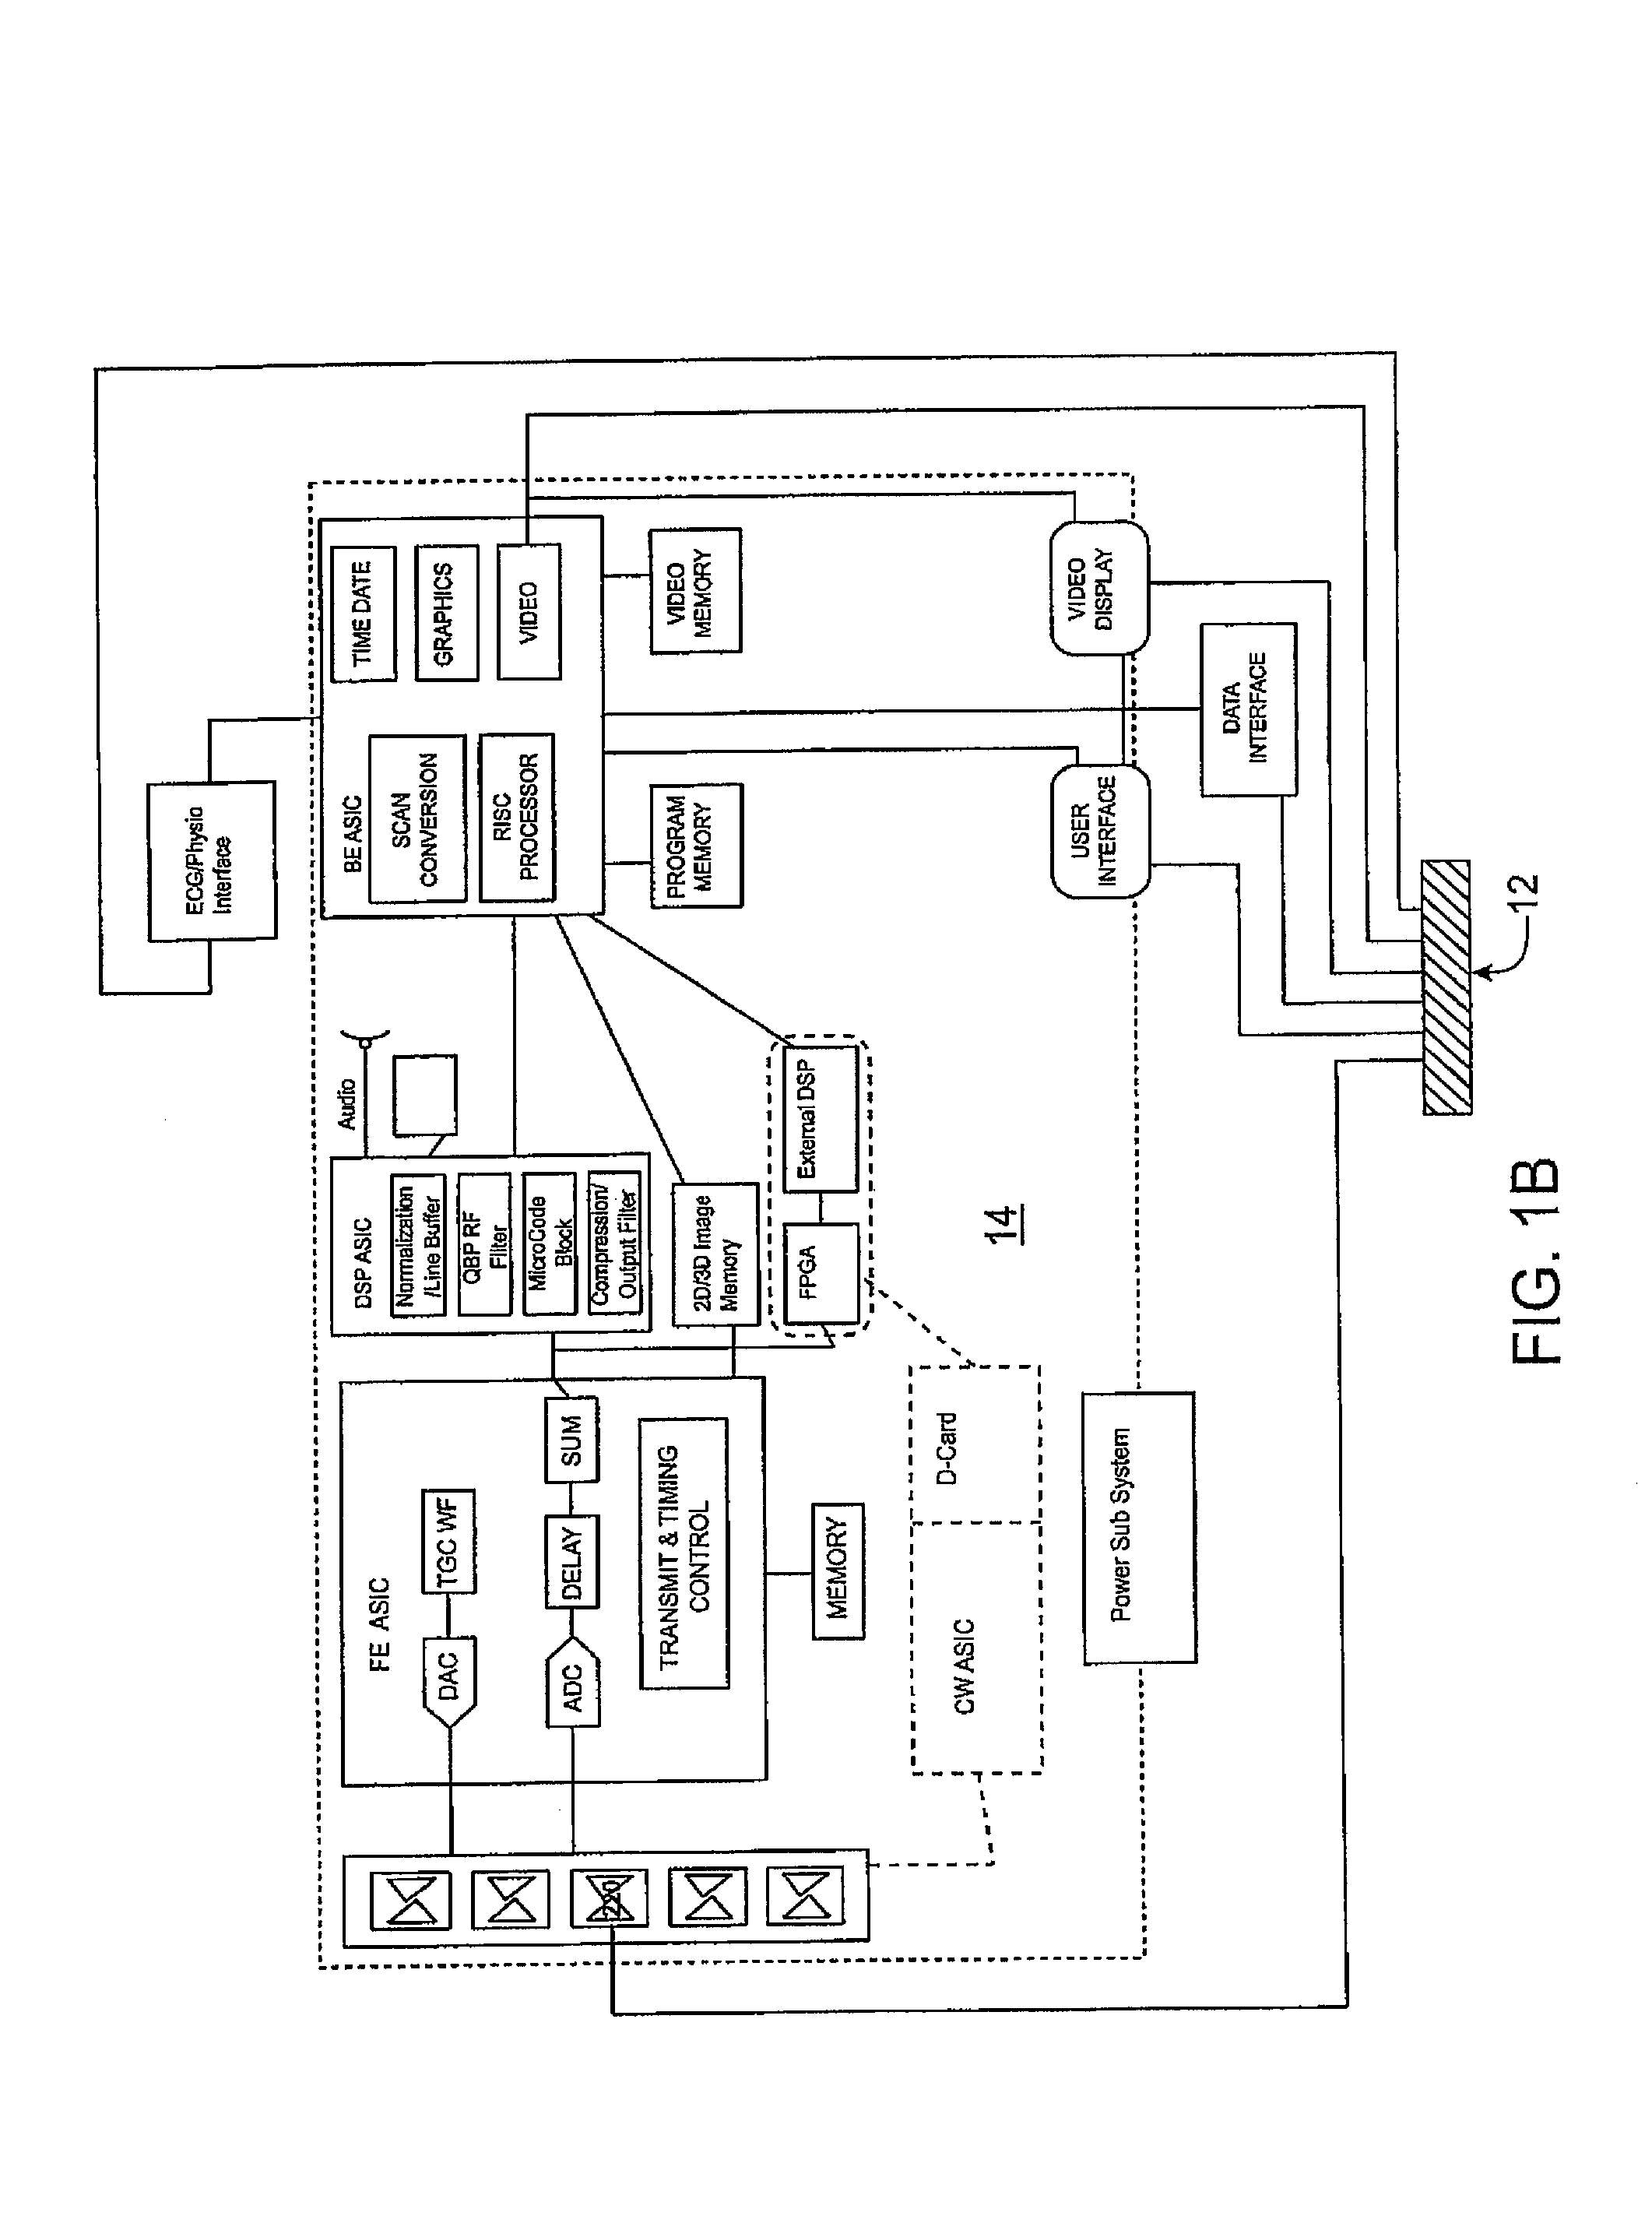 Dock for connecting peripheral devices to a modular diagnostic ultrasound apparatus